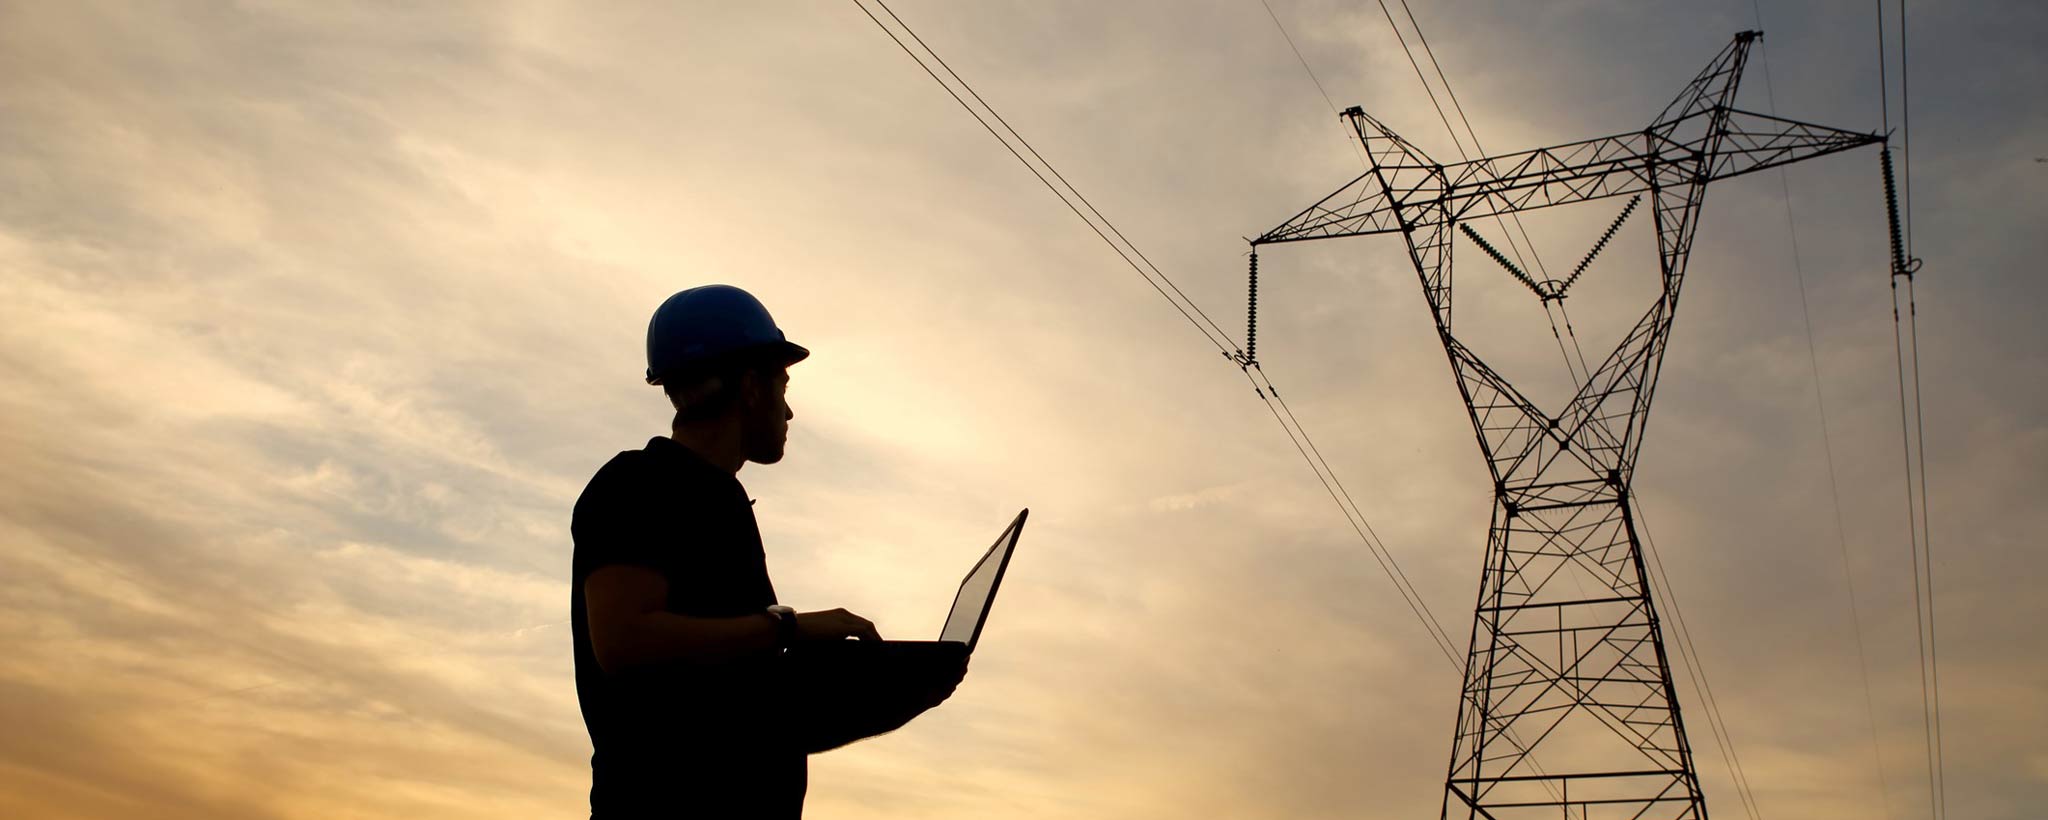 Engineer Working near a High-Voltage transmission tower